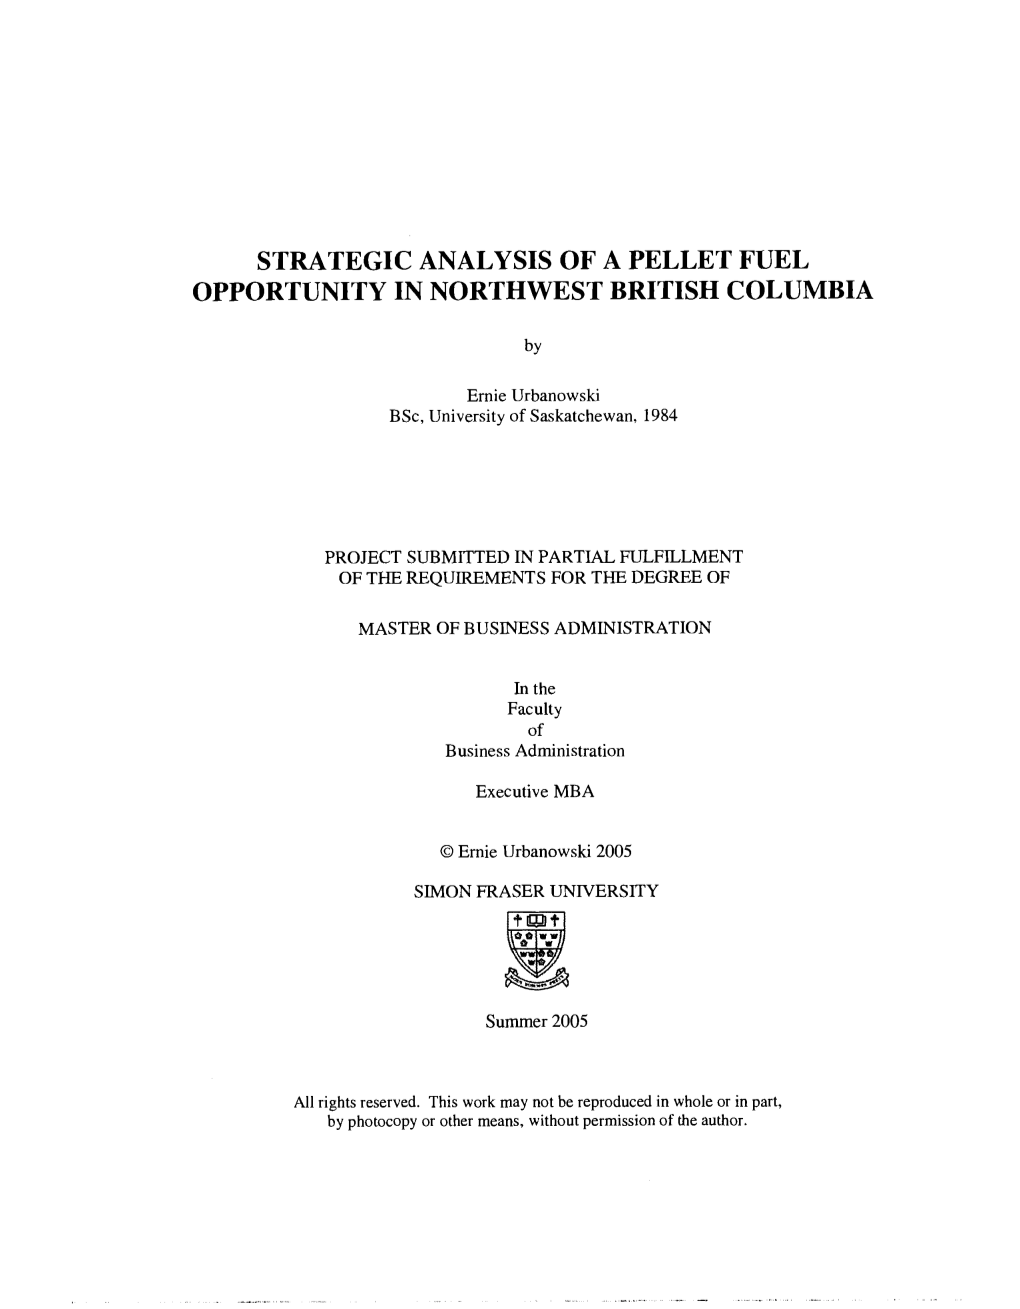 Strategic Analysis of a Pellet Fuel Opportunity in Northwest British Columbia